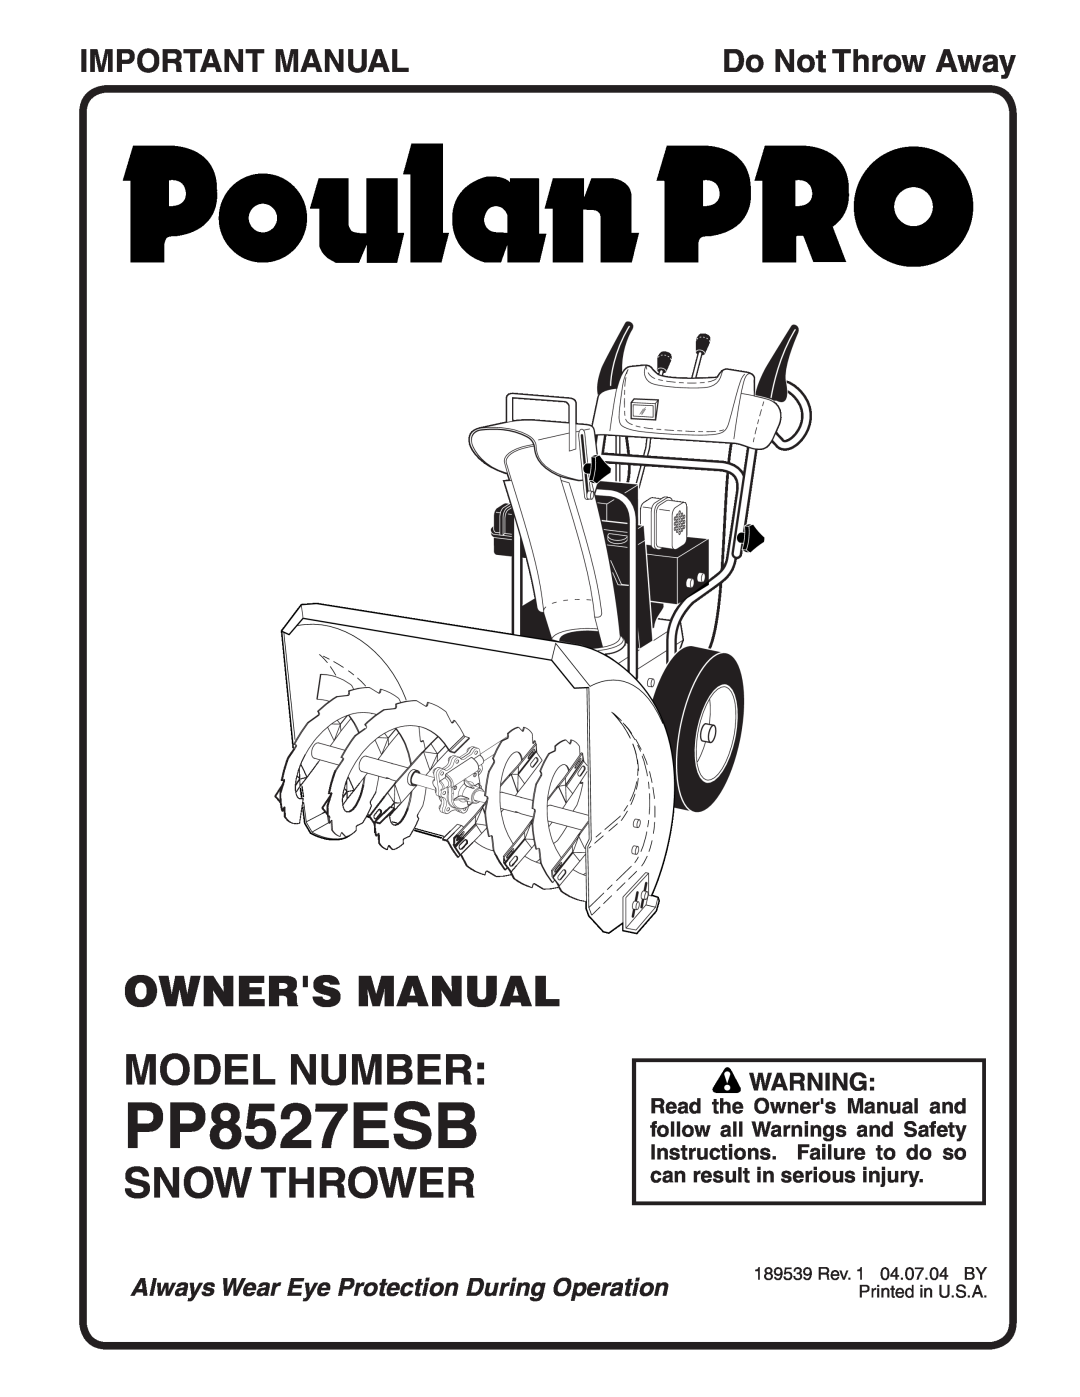 Poulan PP8527ESB owner manual Owners Manual Model Number, Snow Thrower, Important Manual, Do Not Throw Away 